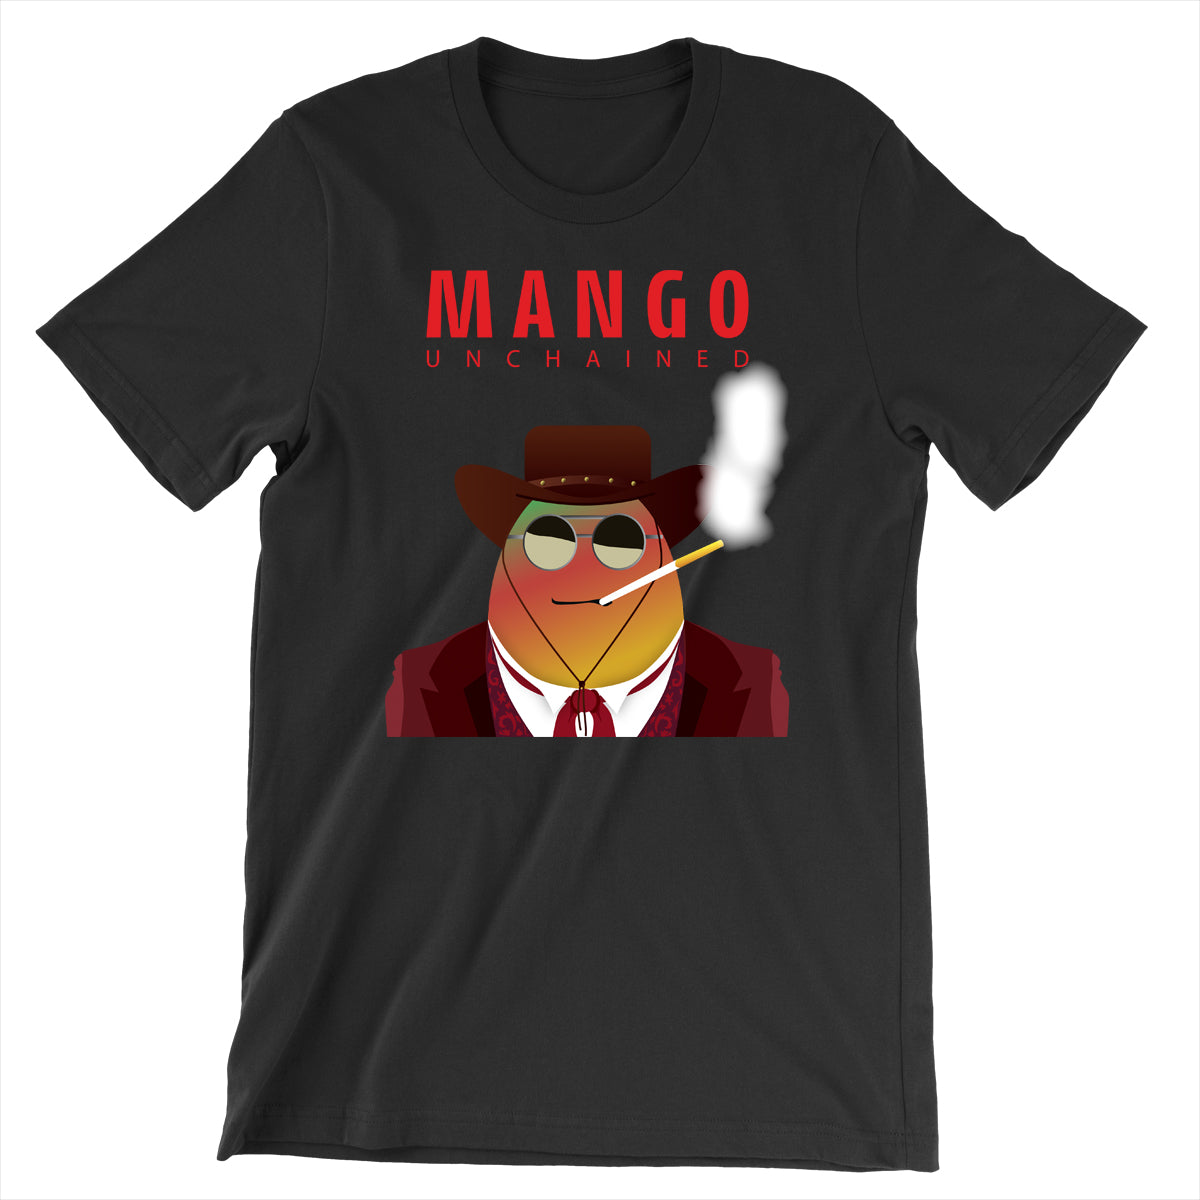 Movie The Food - Mango Unchained T-Shirt - Black